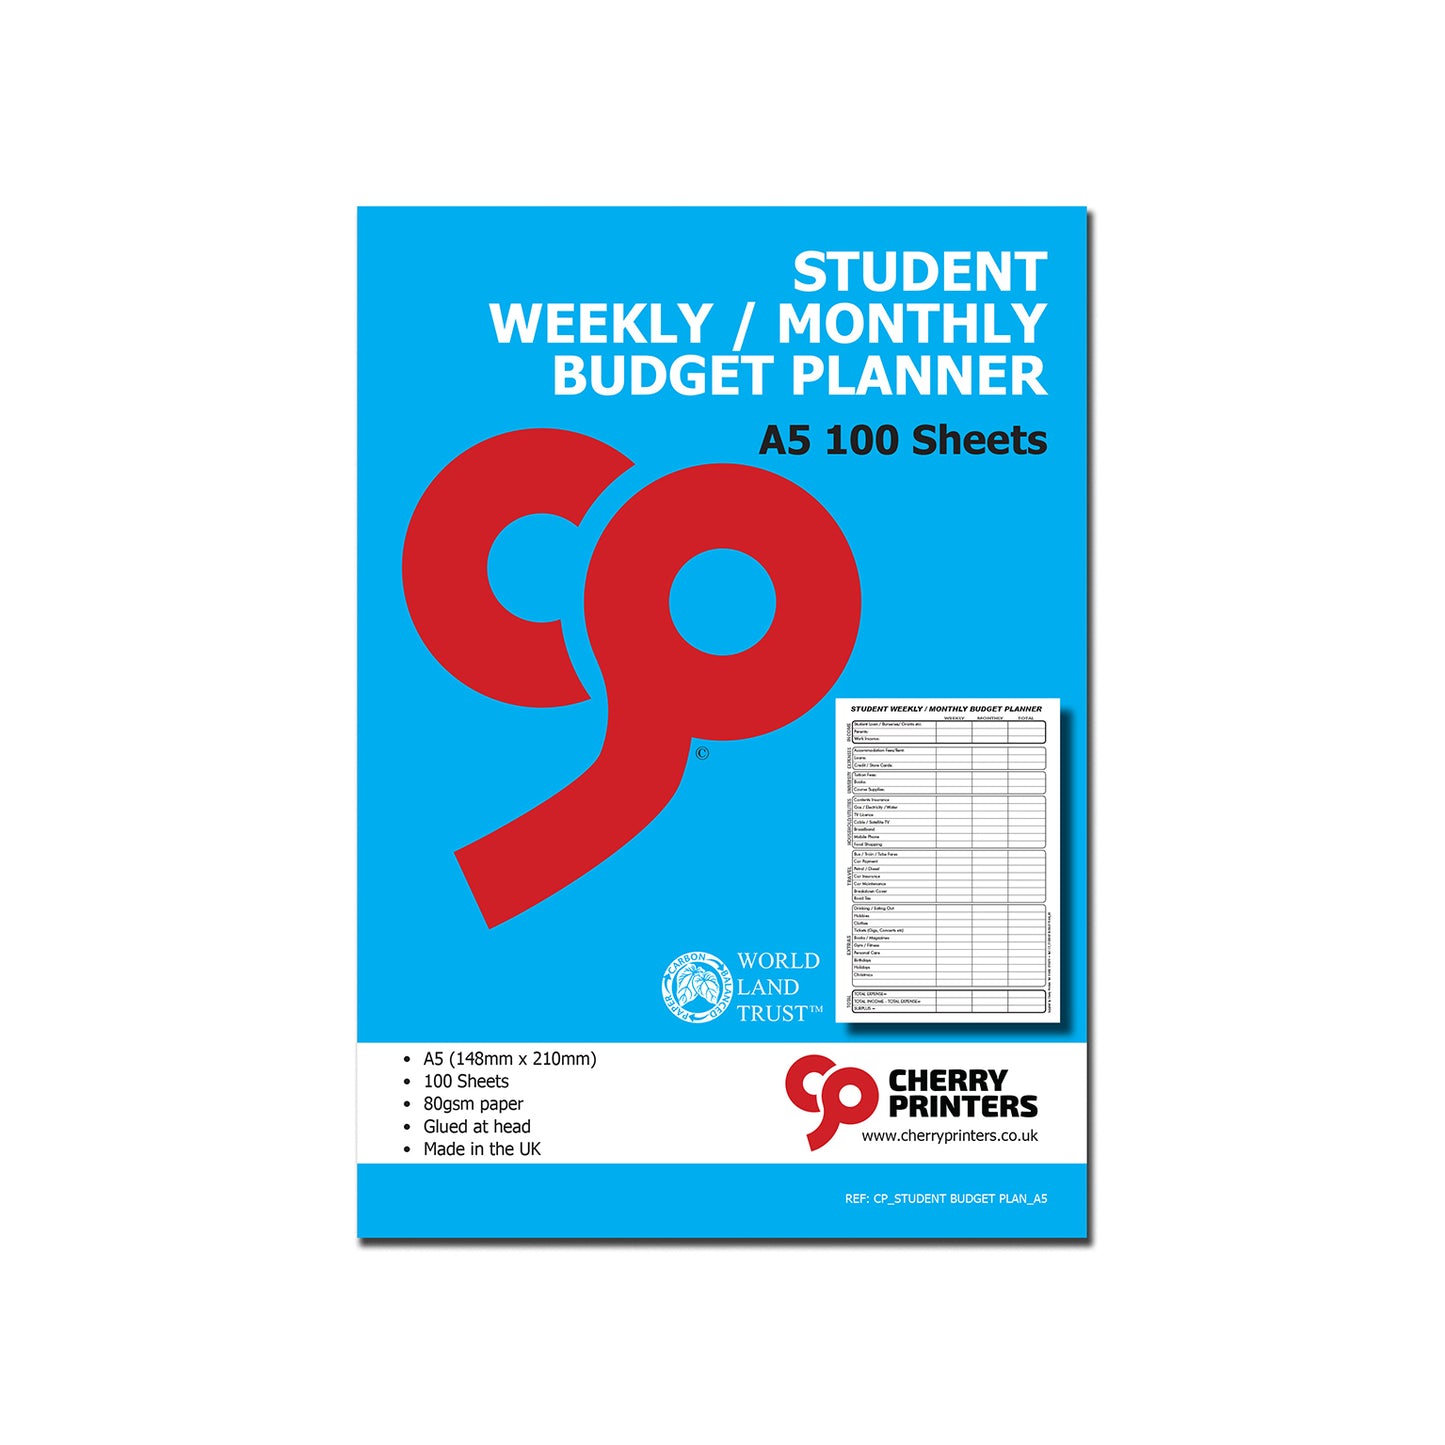 Student Weekly/Monthly Budget Planner A5 100pages 80gsm